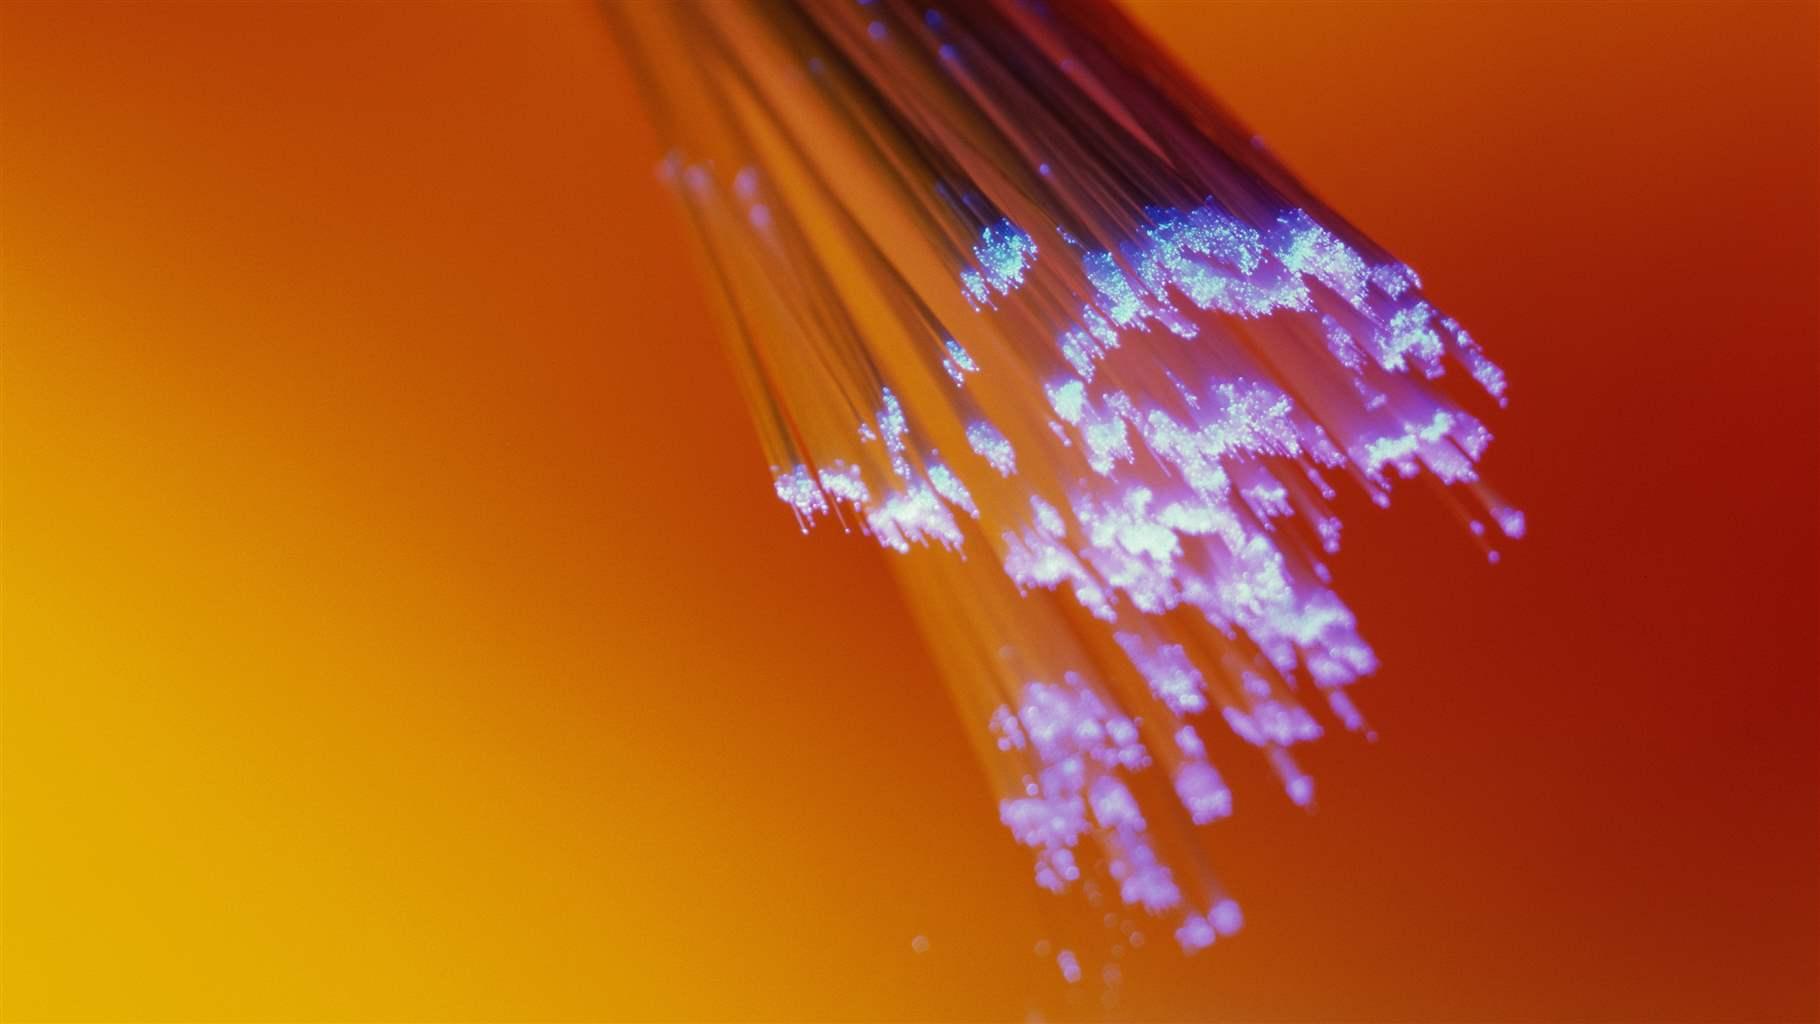 News - 2021 The Price Increase Of Optical Fiber Cable Is Imperative!